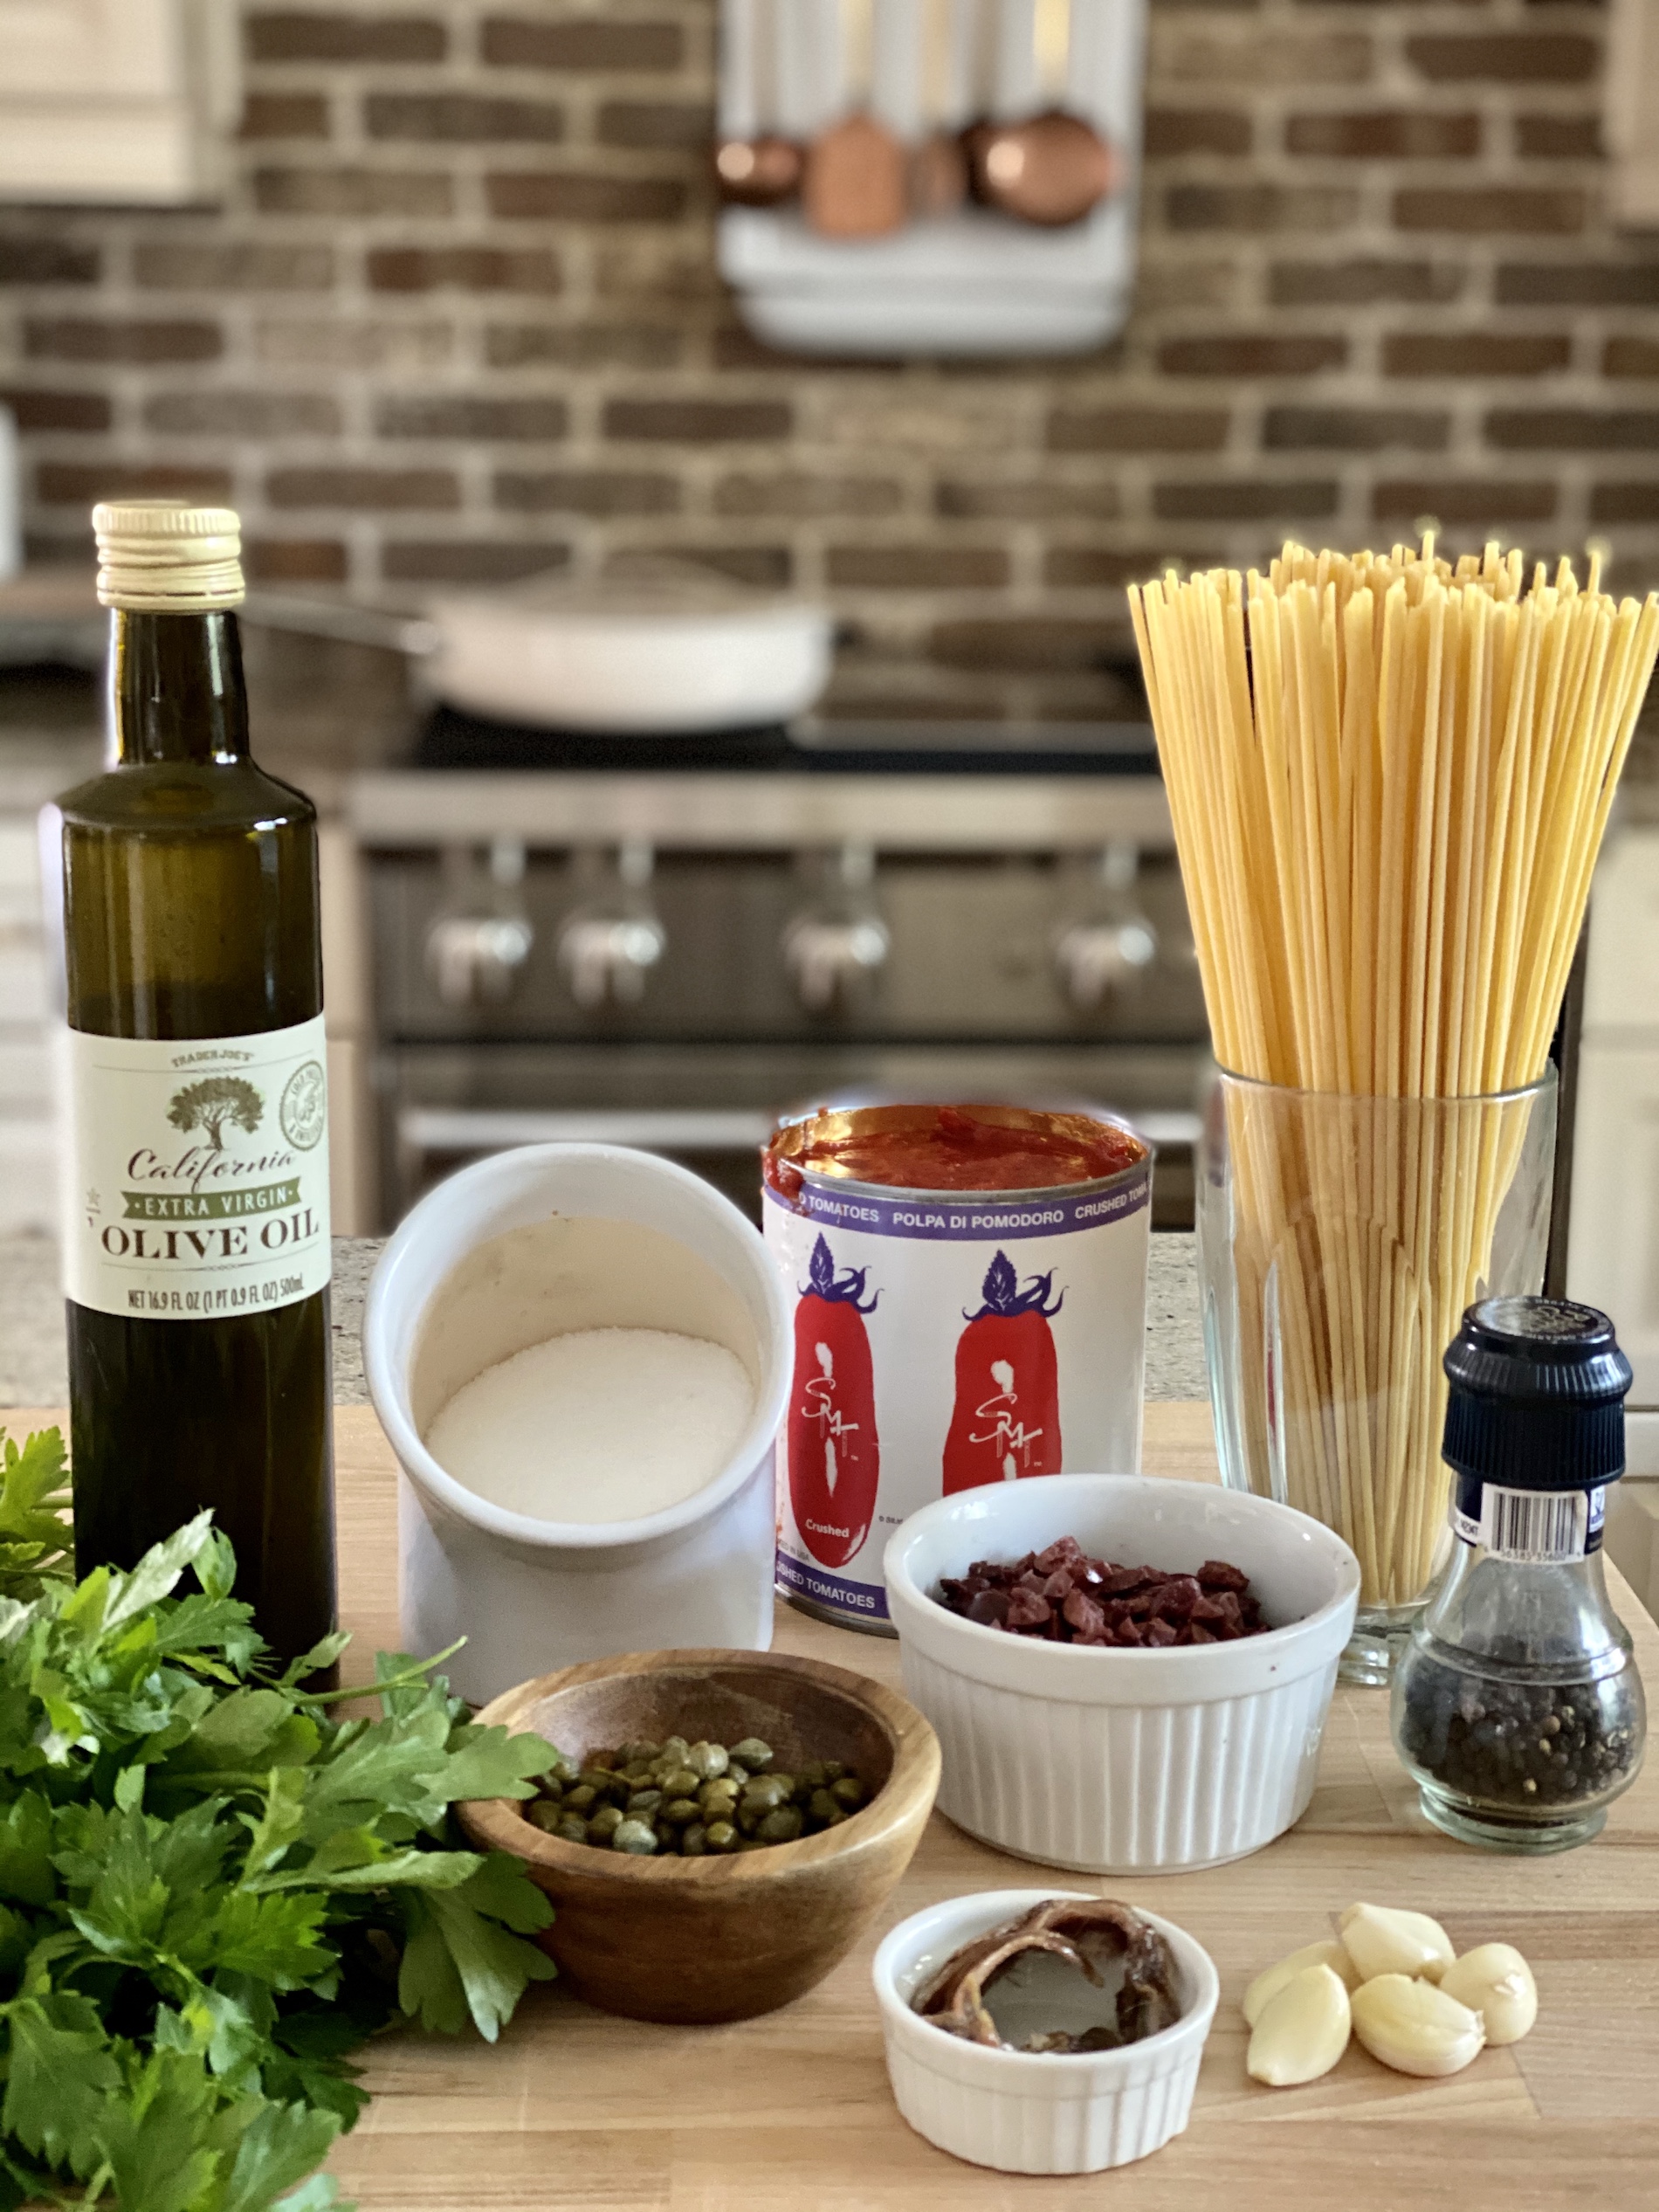 Pasta Puttanesca ingredients including olive oil. salt, pepper, tomatoes, pasta, kalamata olives, capers, red pepper flakes, anchovies, and parsley